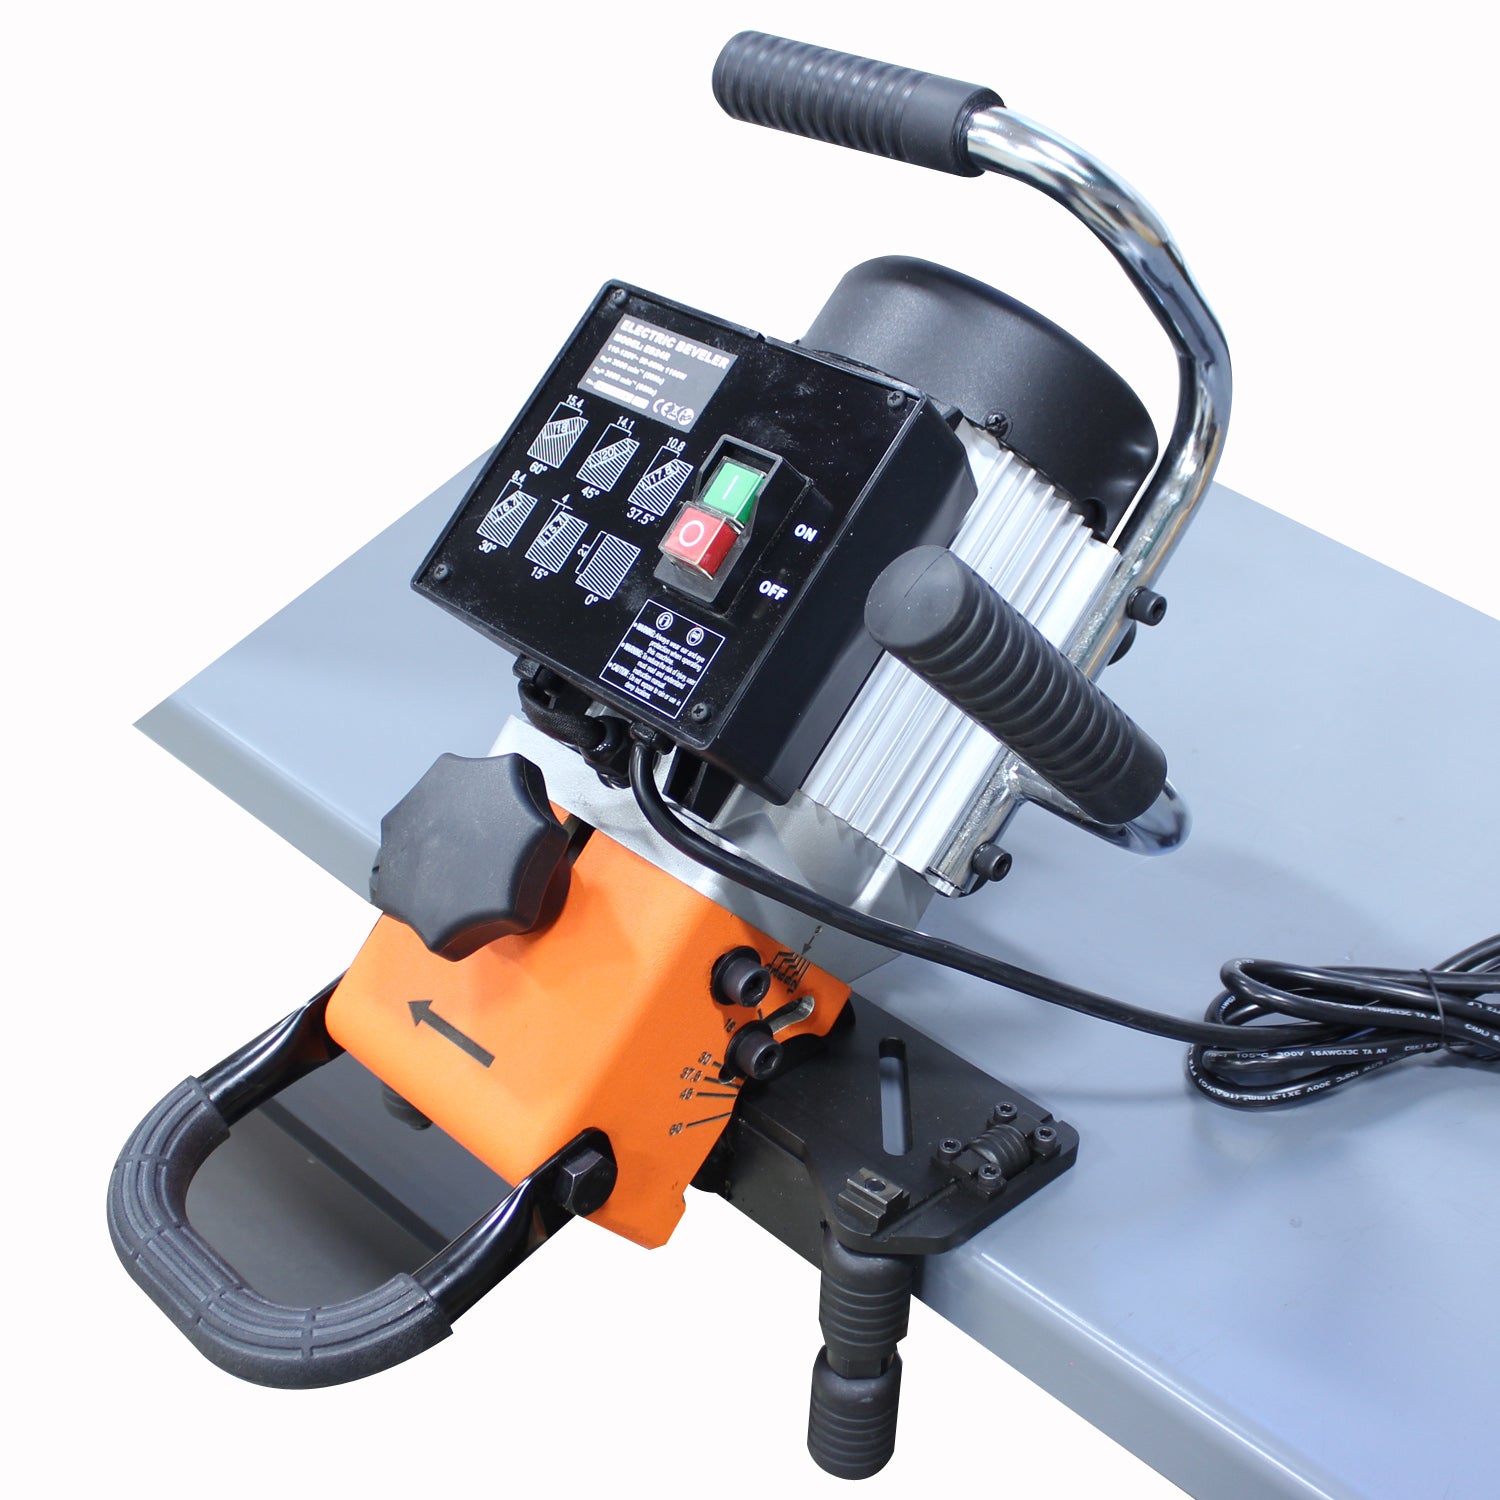 Baileigh CM-060PR 110V Portable Hand-Held Beveling Machine, O-60 Degrees of Bevel, Face Milling and Pipe/Radius